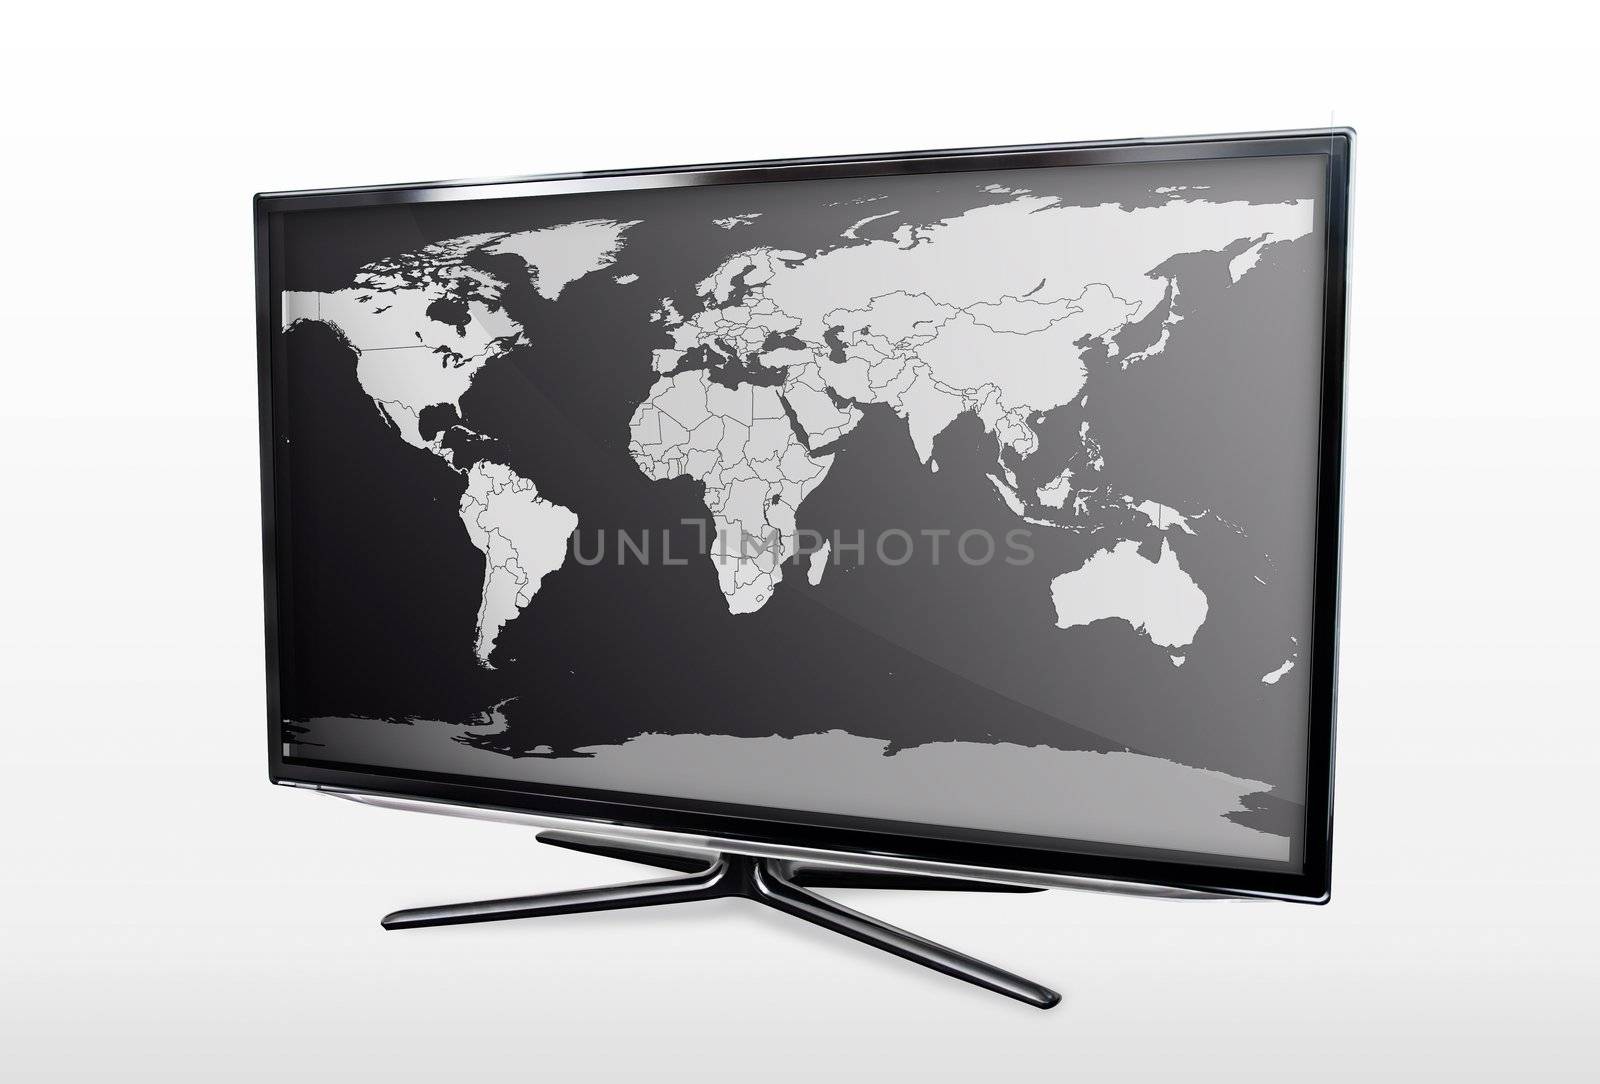 Modern LED TV screen with blank world map by simpson33